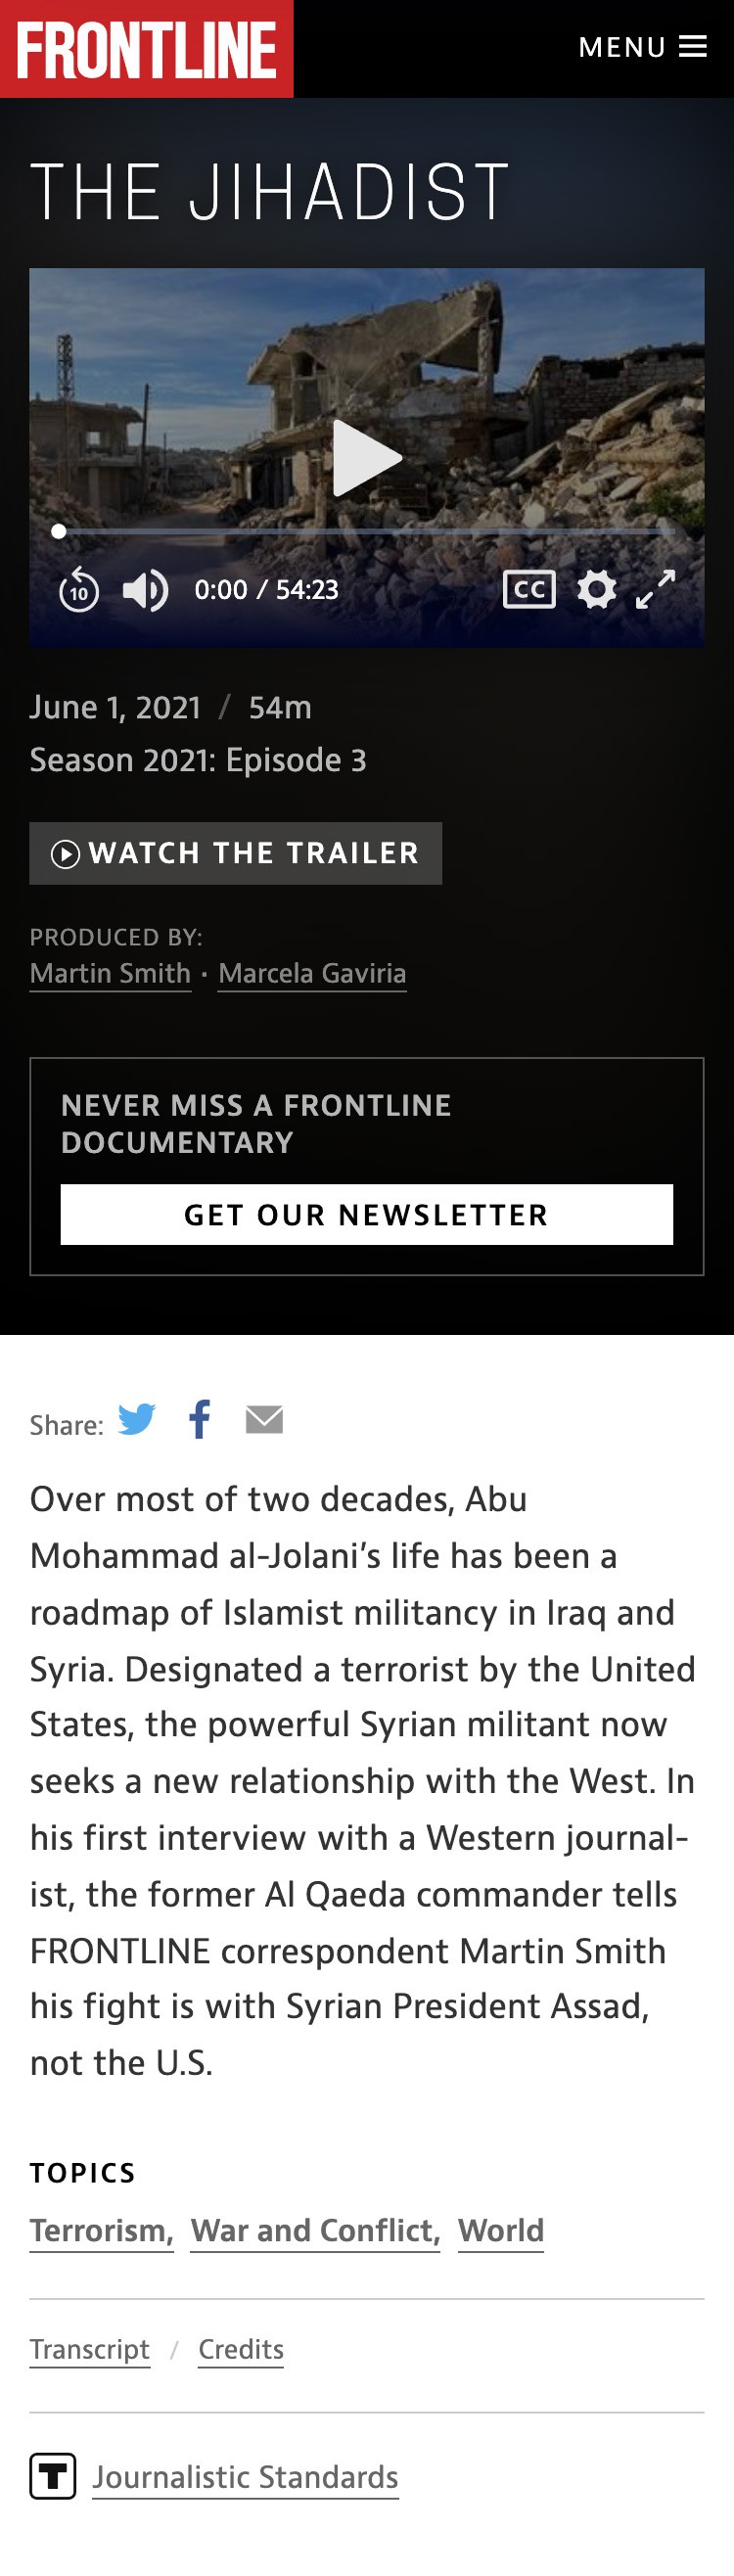 A mobile layout of the FRONTLINE website film page.